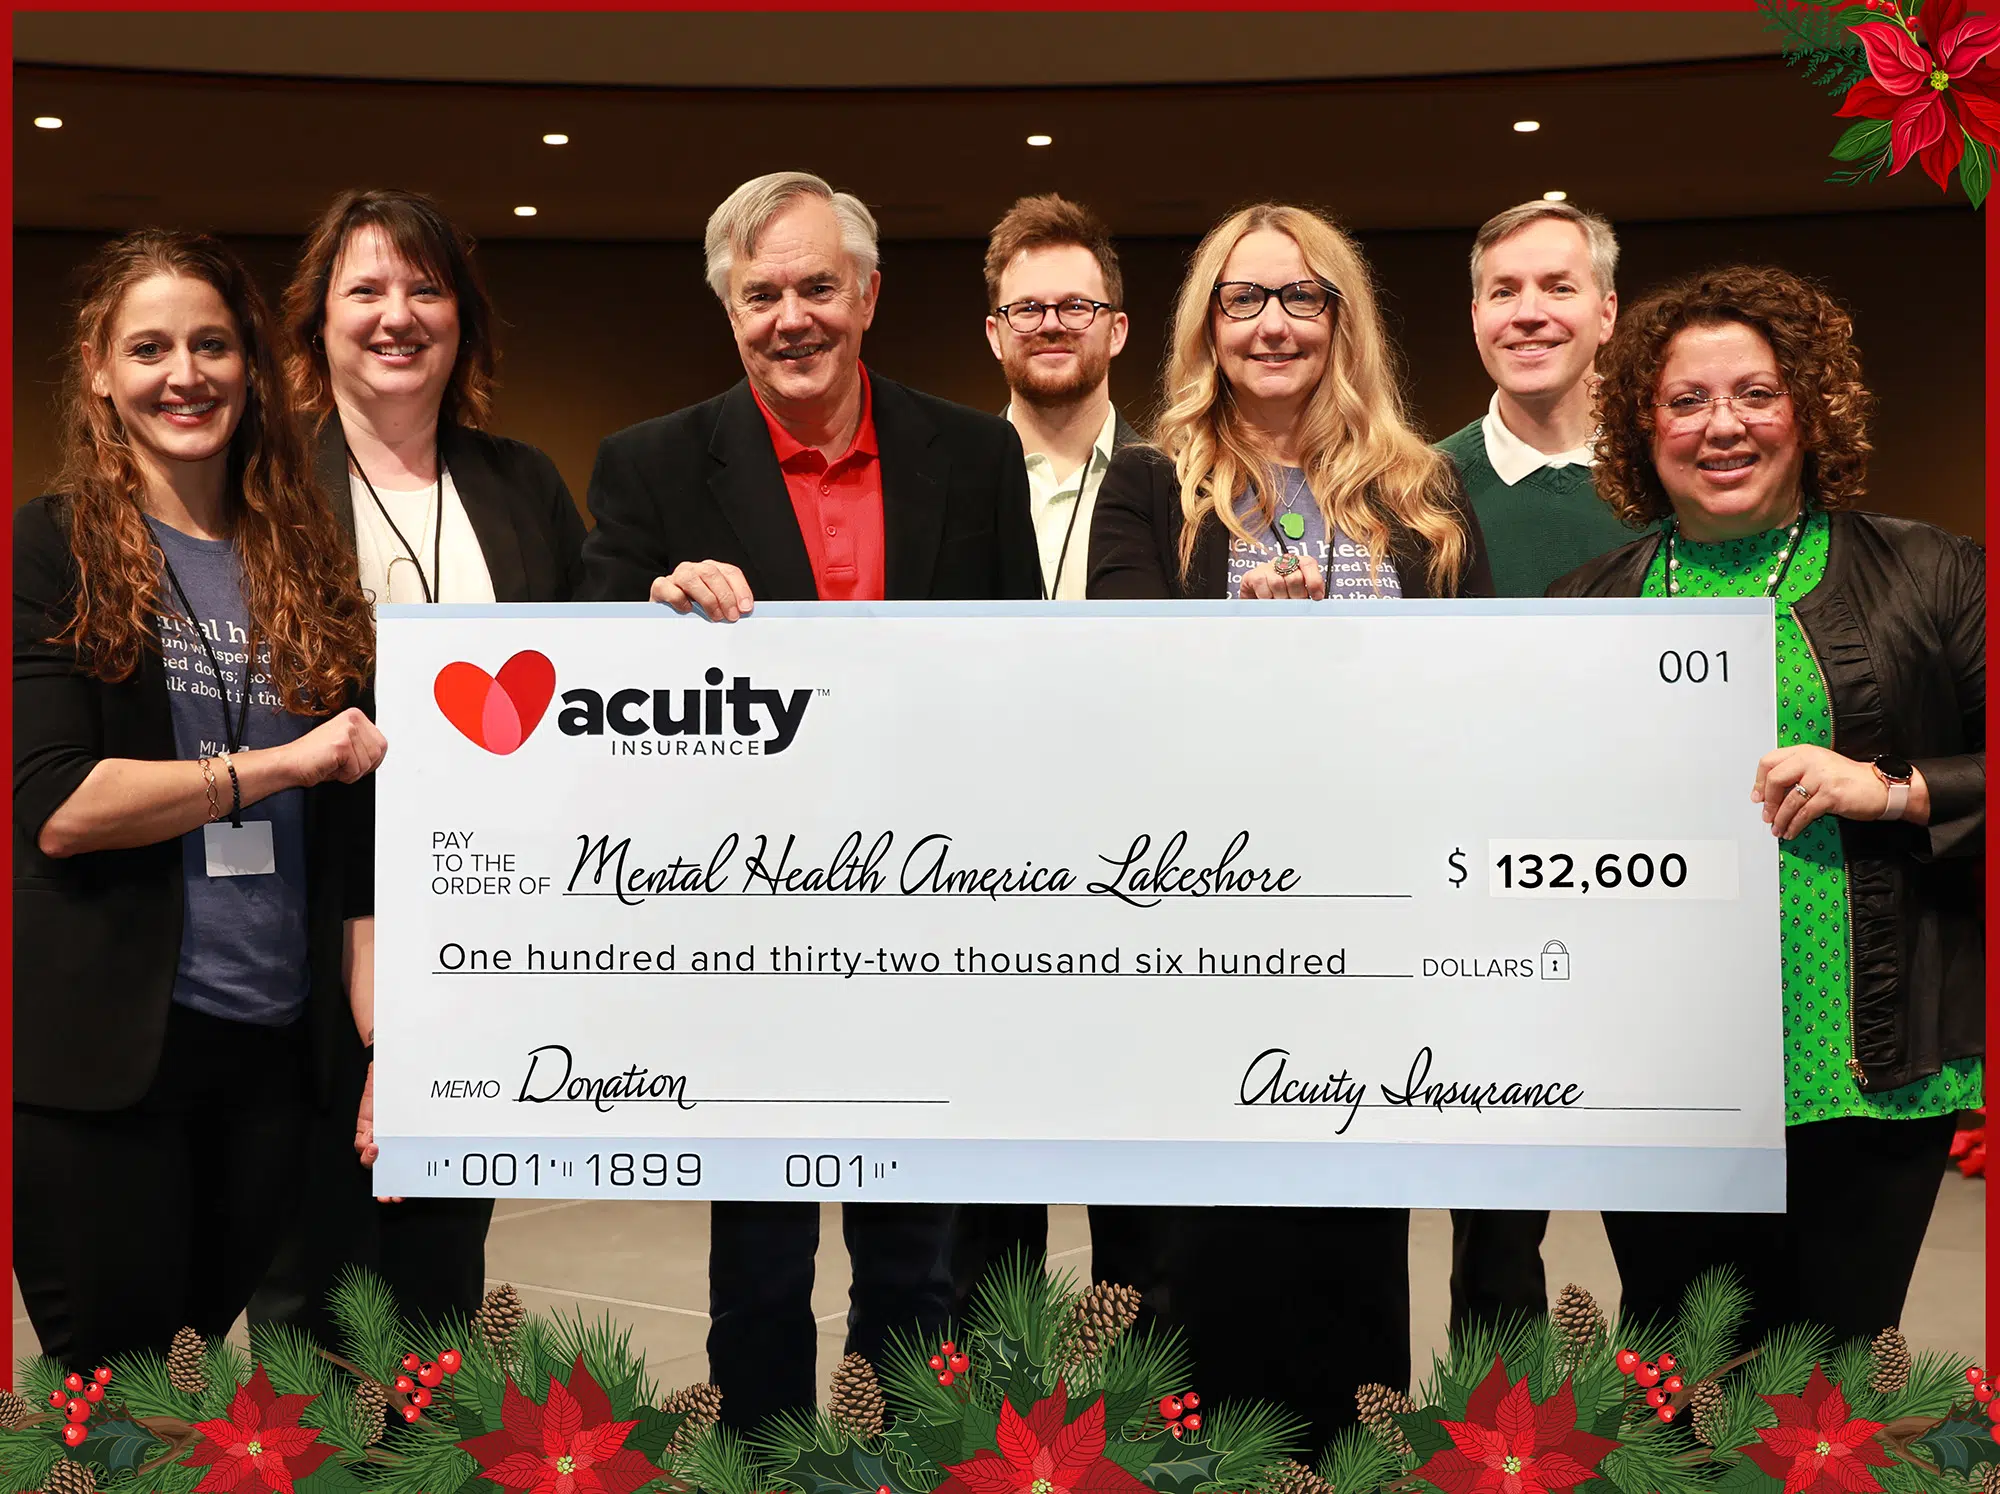 Acuity Employees Distribute More Than $650,000 in Support to Charitable Organizations